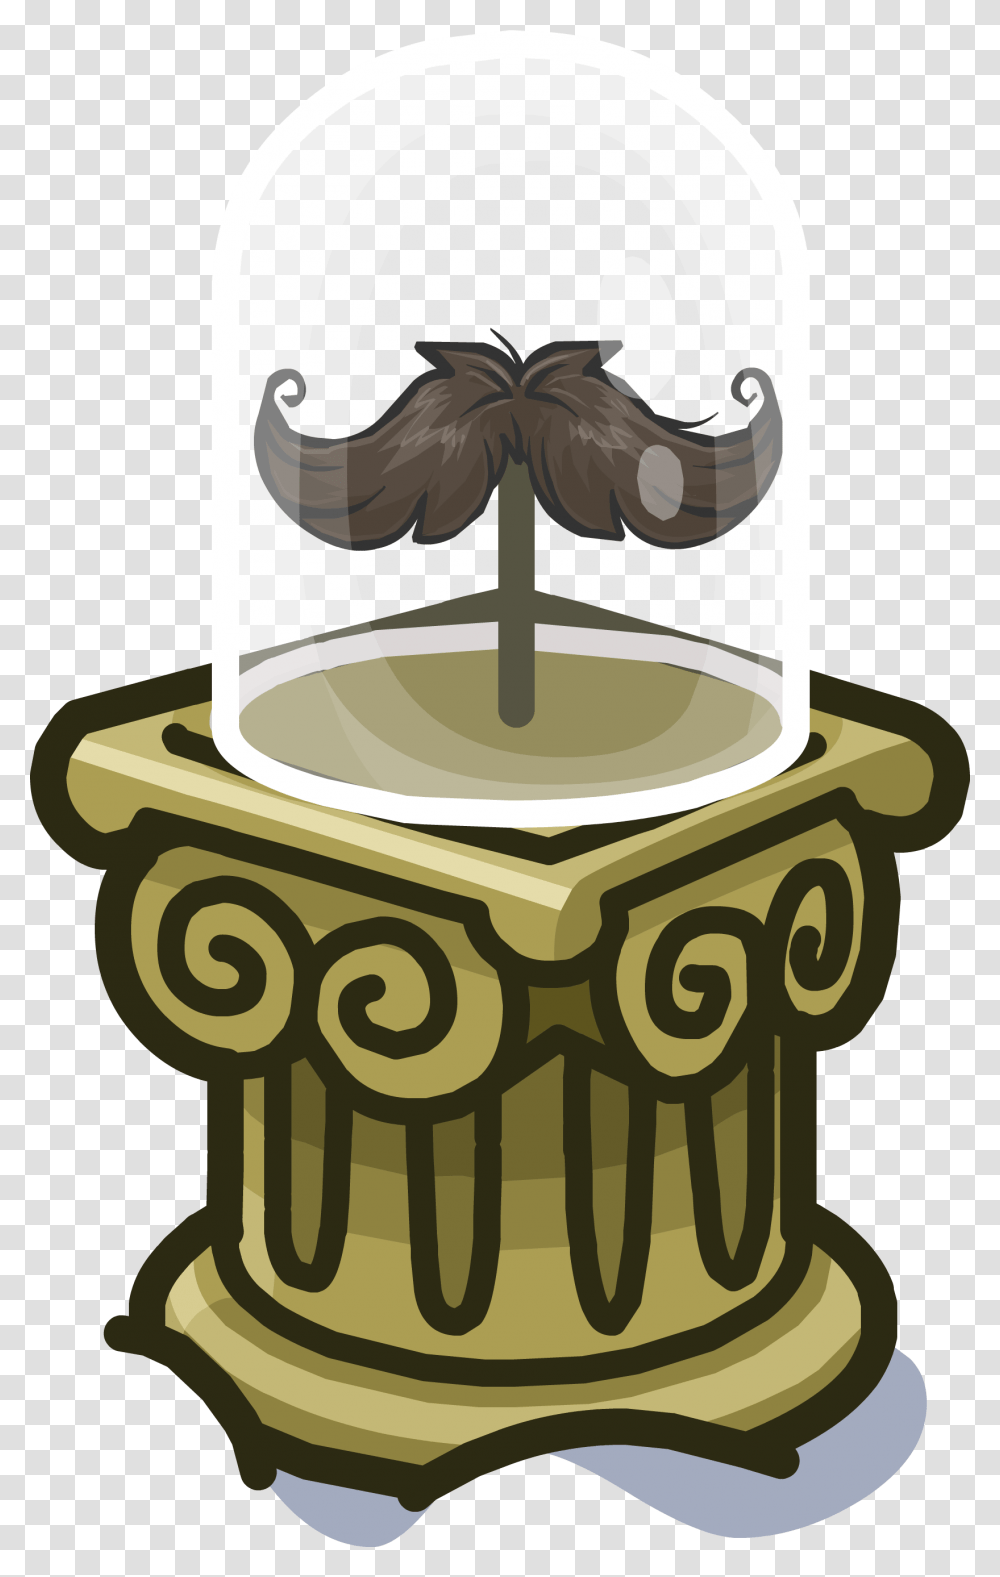 Mustache Madness Stands Curly Mustache Illustration, Water, Glass, Birthday Cake, Dessert Transparent Png